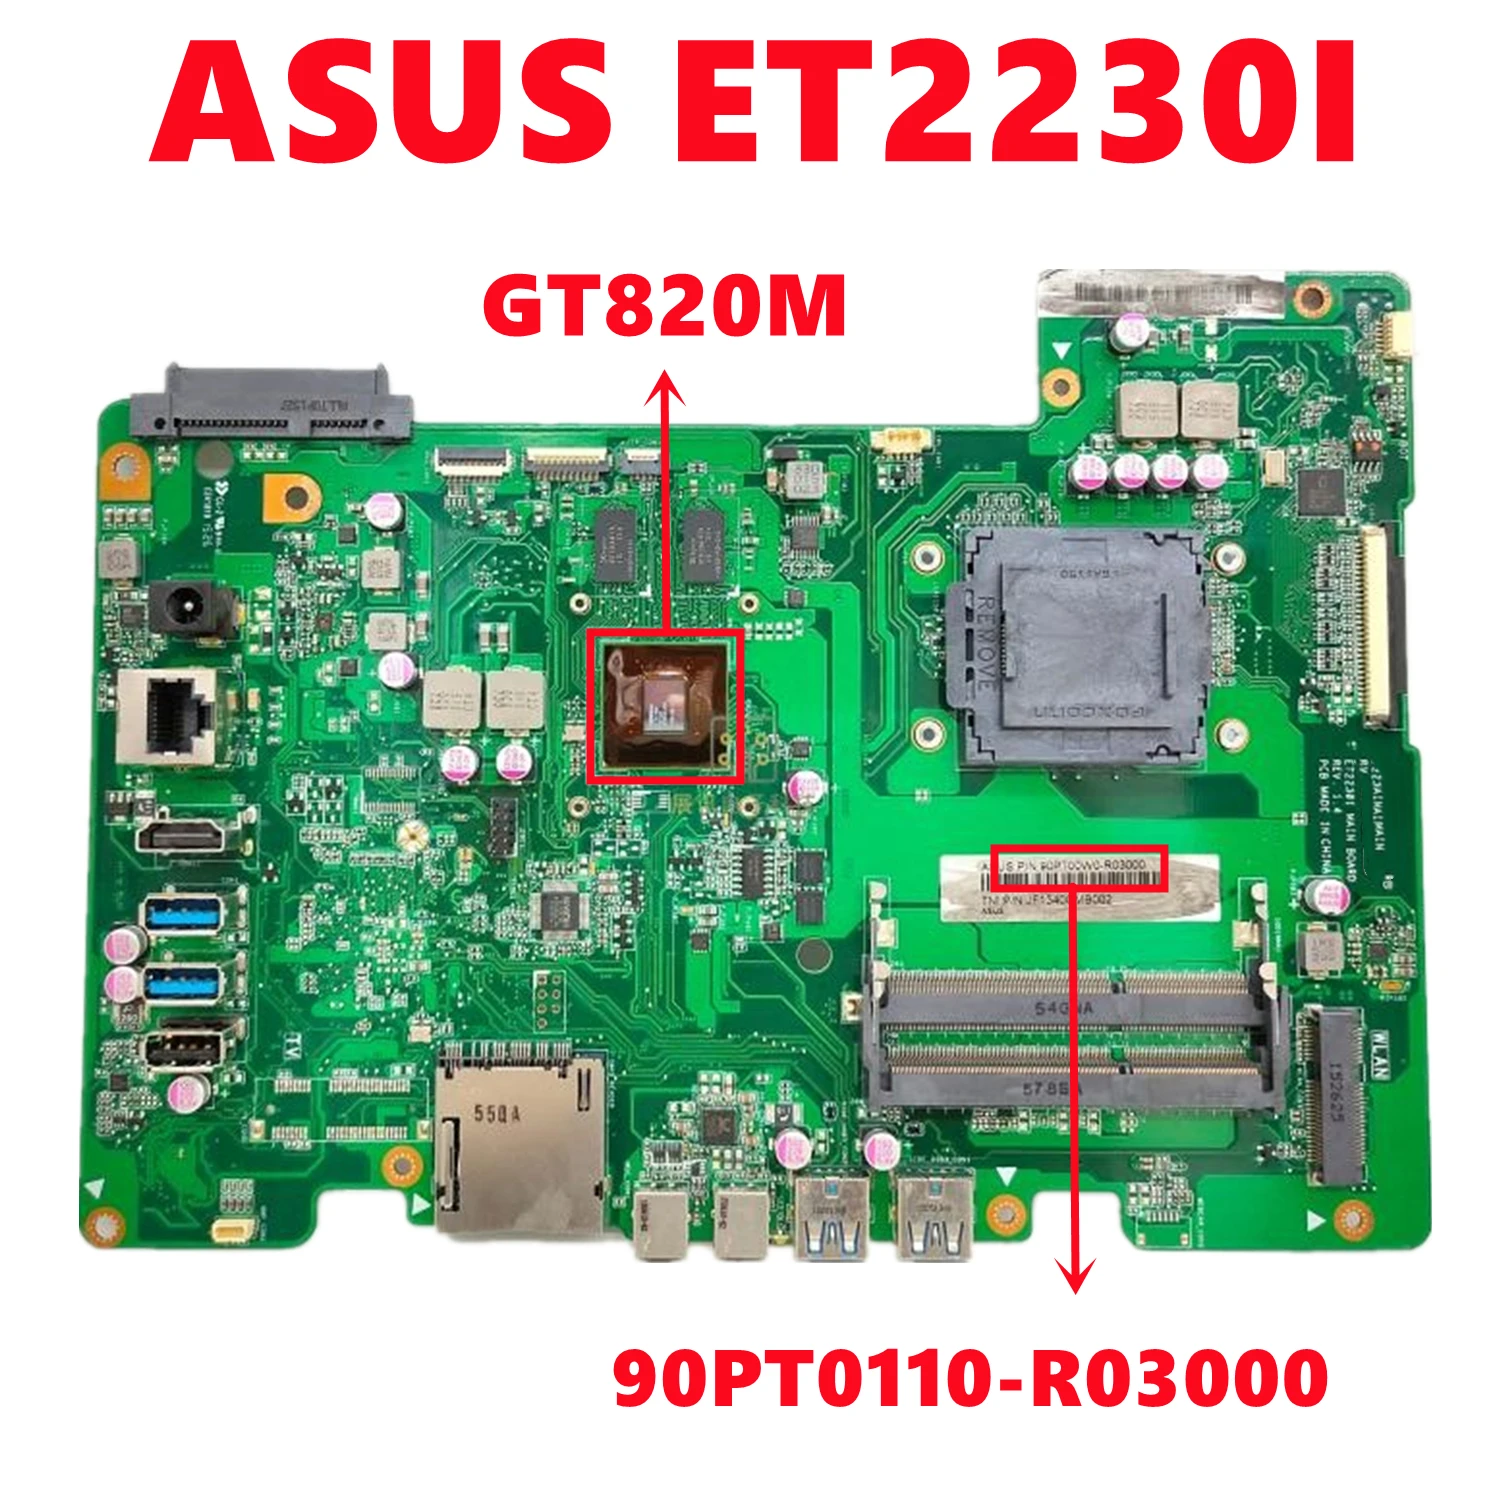 

90PT0110-R03000 Mainboard For ASUS ET2230I ET2230 All-in-one Motherboard With N15V-GM-S-A2 DDR3 100% Tested OK